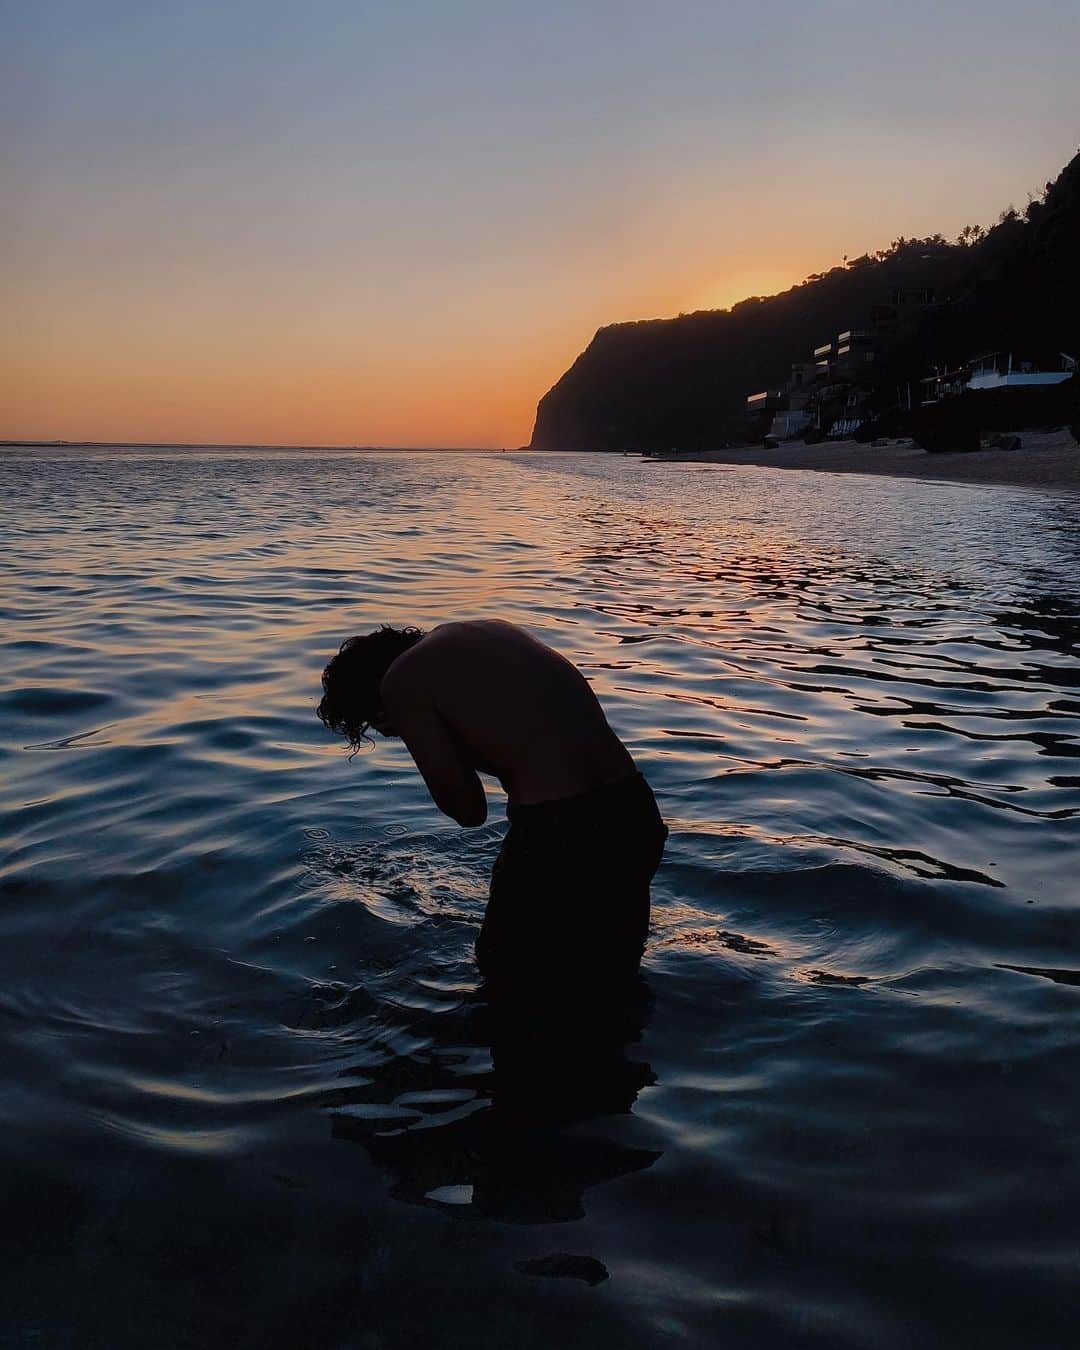 Putri Anindyaのインスタグラム：「Rebirth //   The moodiest sunset with @matthewdjoevan almost two months ago. Always a good time on the sea with him. And i just realized it’s been a long time since I post a picture of him at the Melasti Beach, our fav place to swim since 2016 lol. This beach changed a lot, so did we. Time keeps ticking to the better end. Before I said more of my thoughts, let me just say happy birthday to you @matthewdjoevan , the moon child, the sea creature 🌊 🌙   #portrait #portraitmood #sea #sunset #mobilephone」